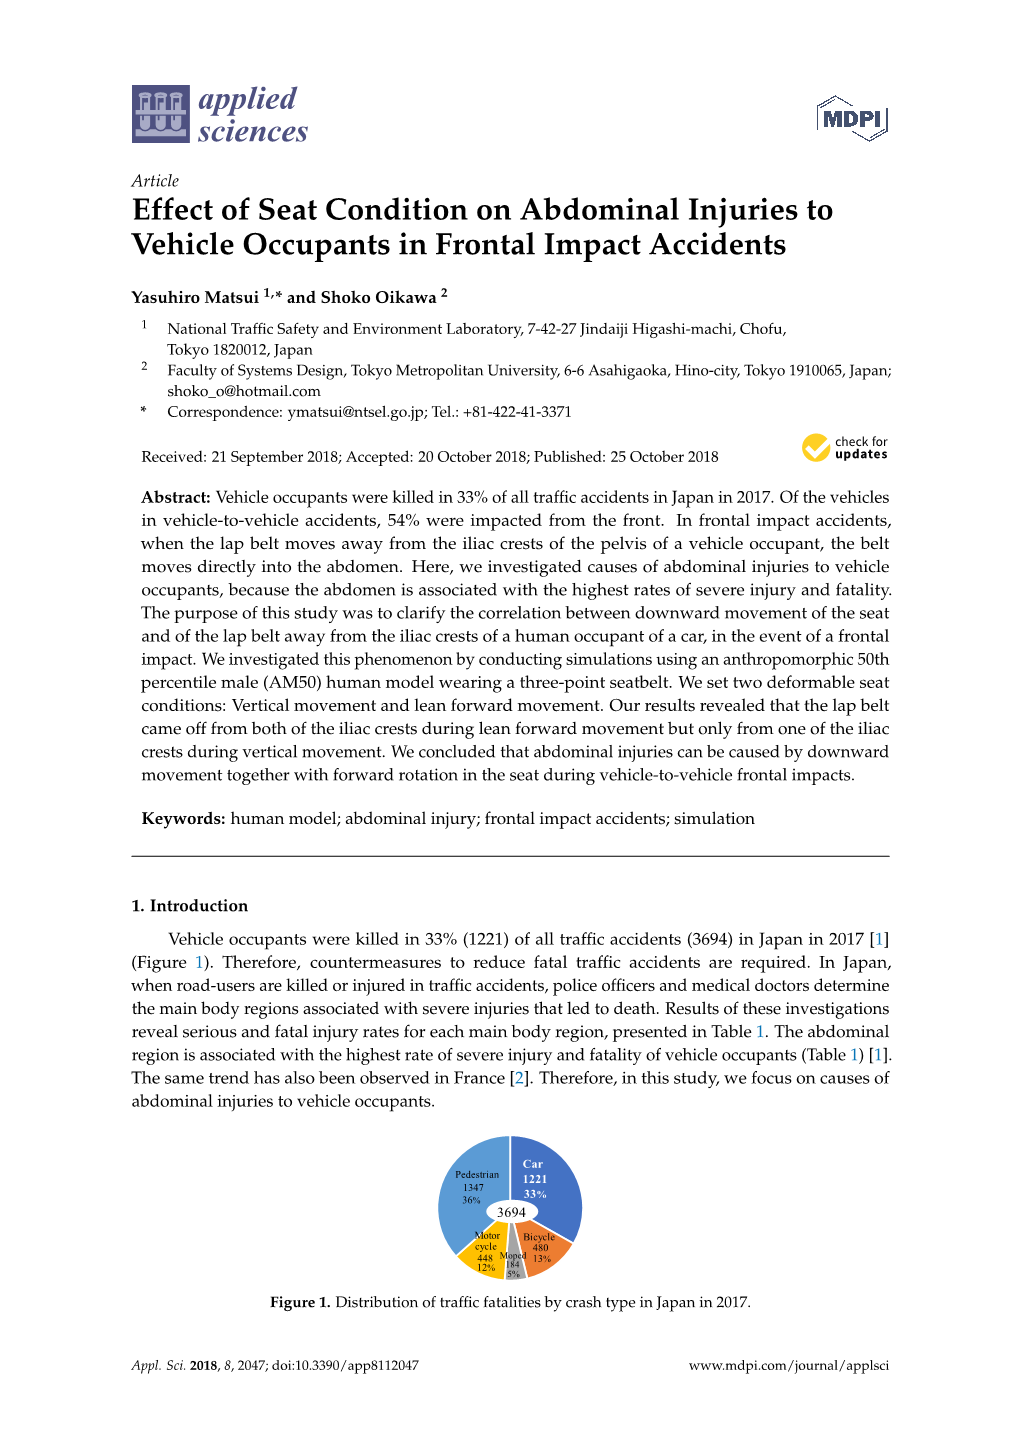 Effect of Seat Condition on Abdominal Injuries to Vehicle Occupants In